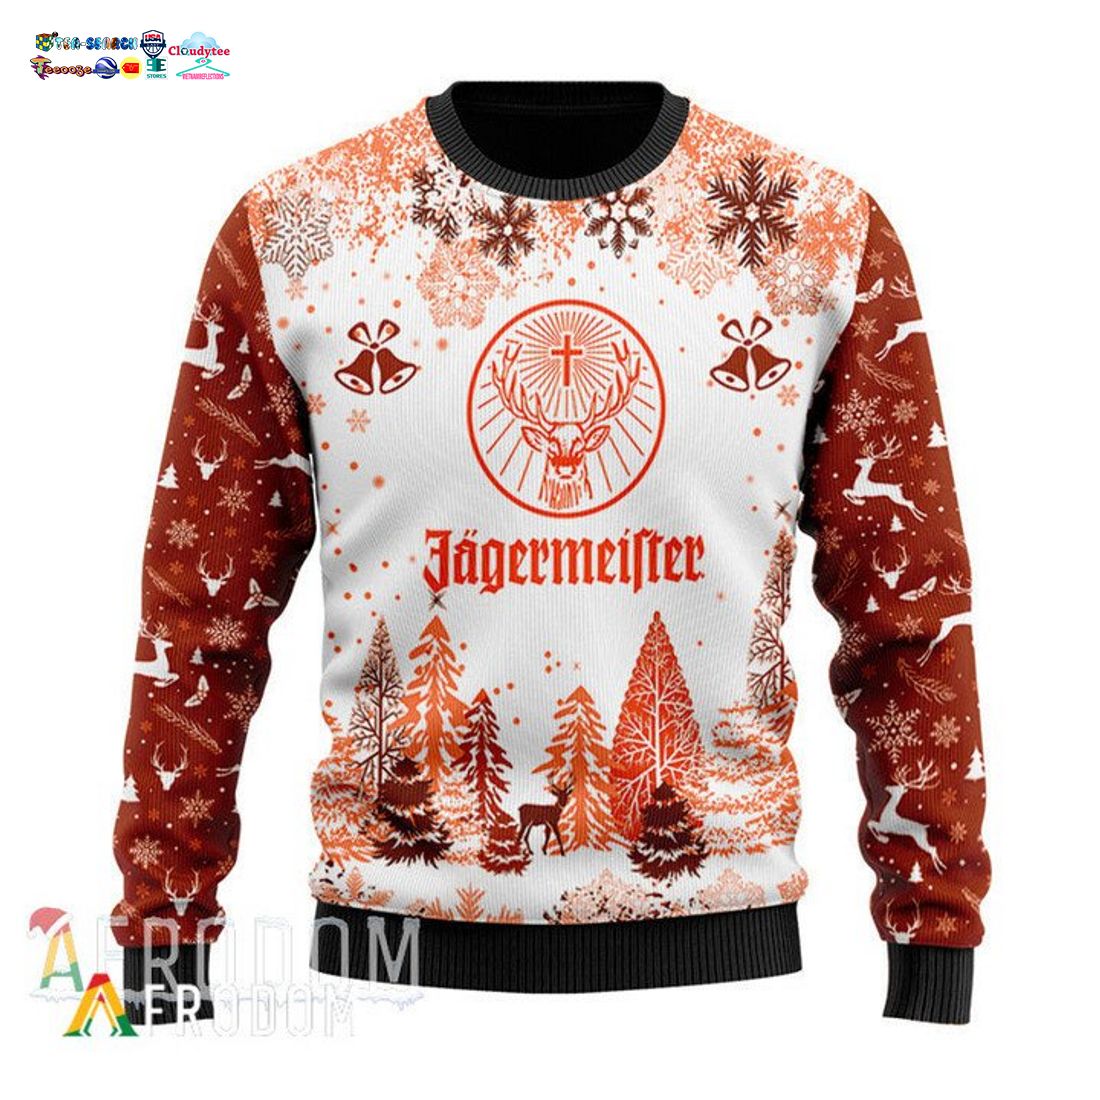 Jagermeister Ver 3 Ugly Christmas Sweater